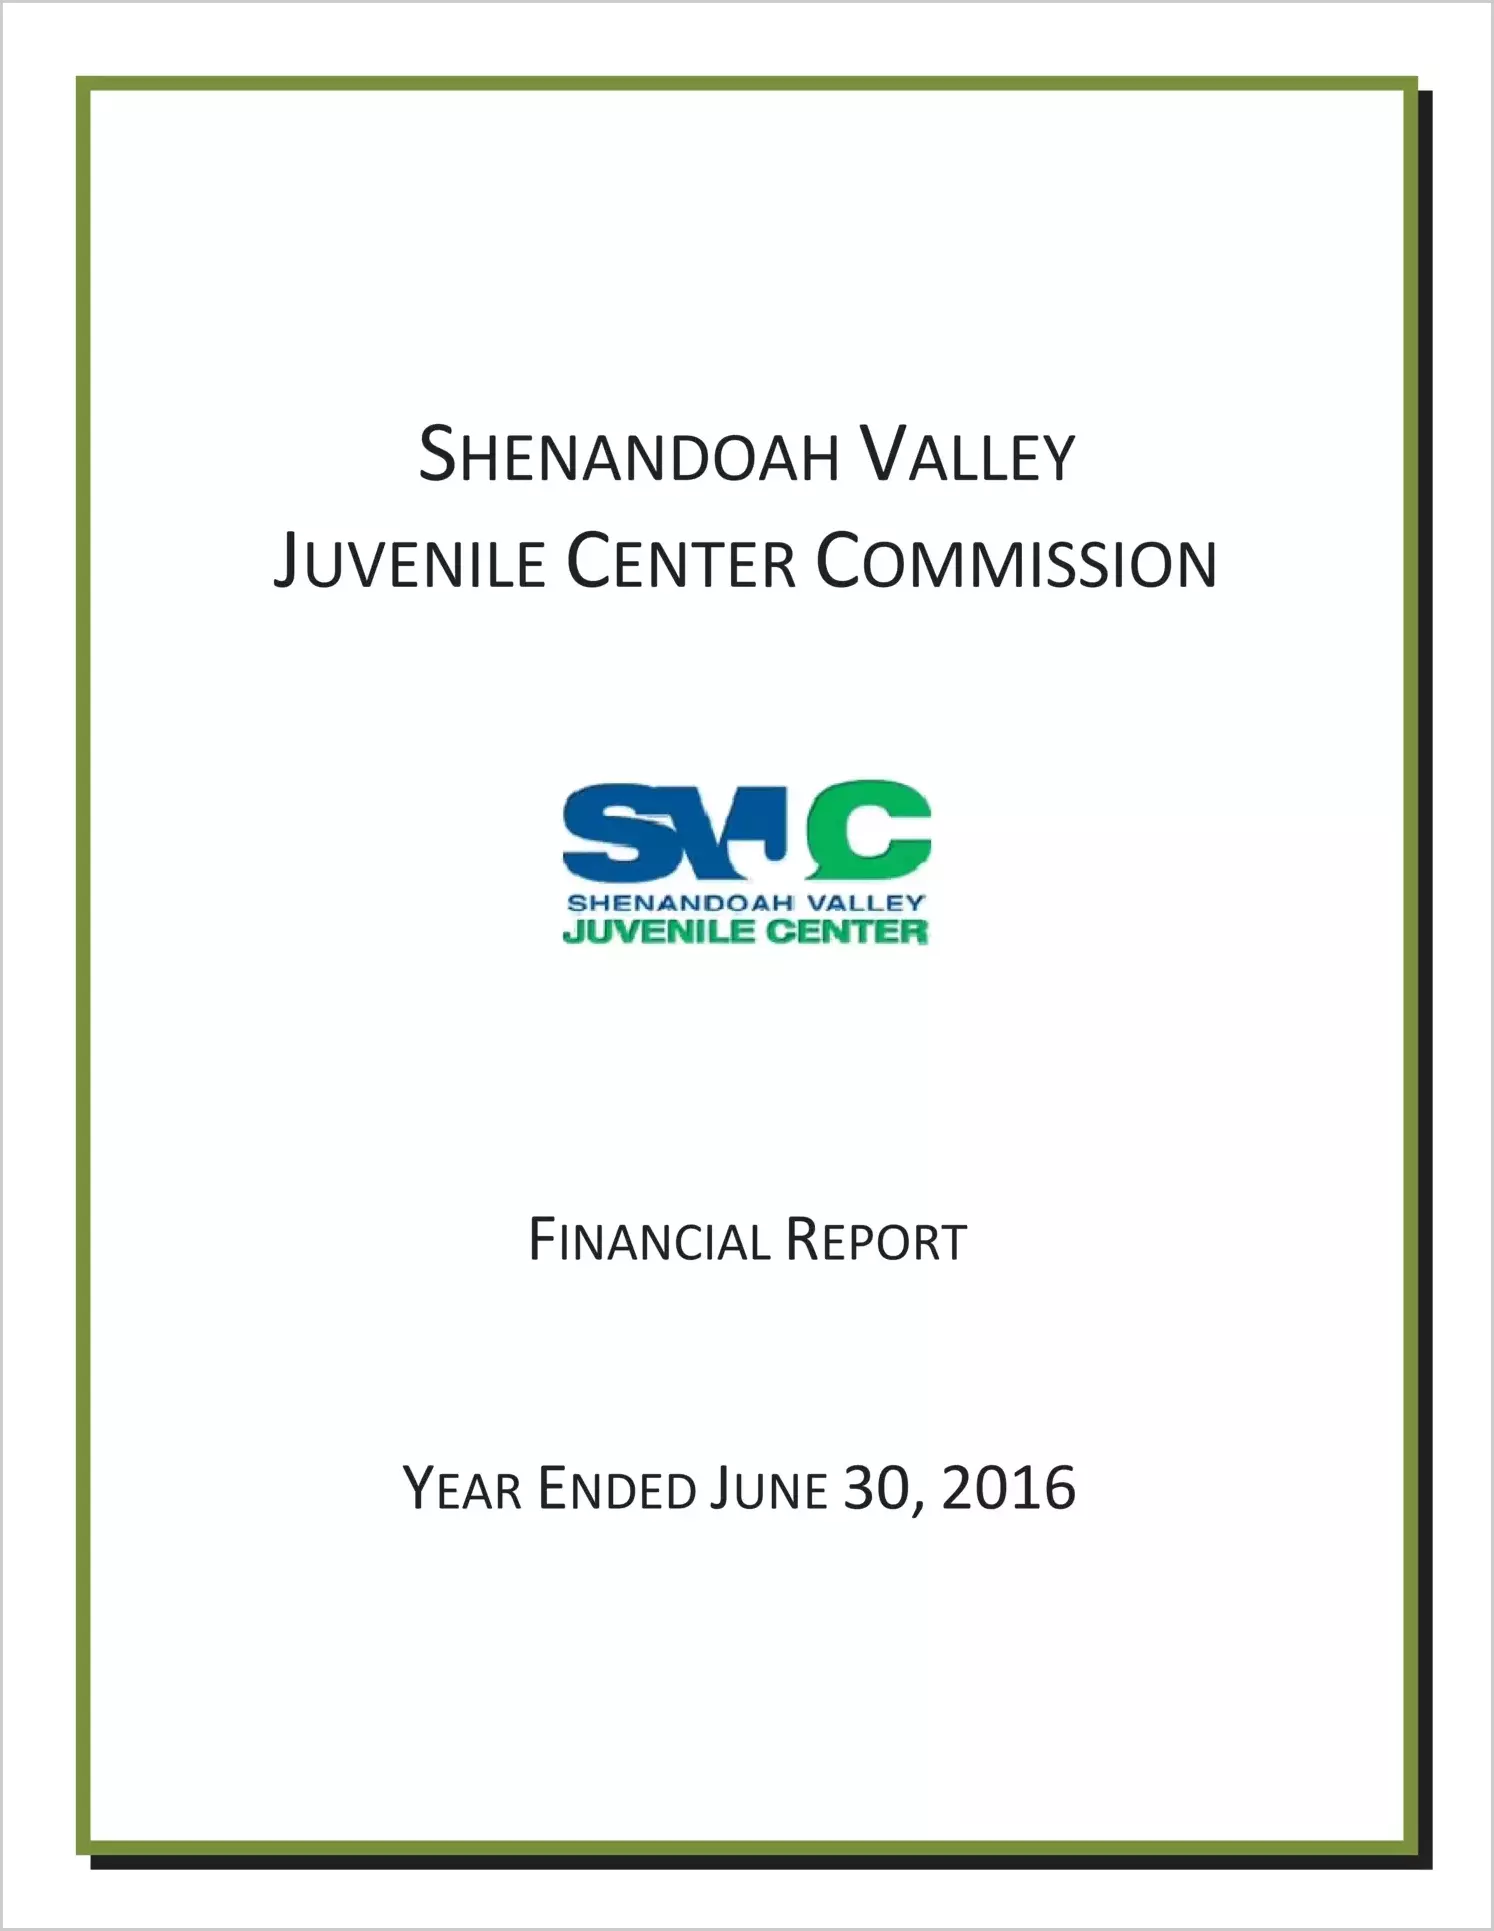 2016 ABC/Other Annual Financial Report  for Shenandoah Valley Juvenile Detention Home Commission